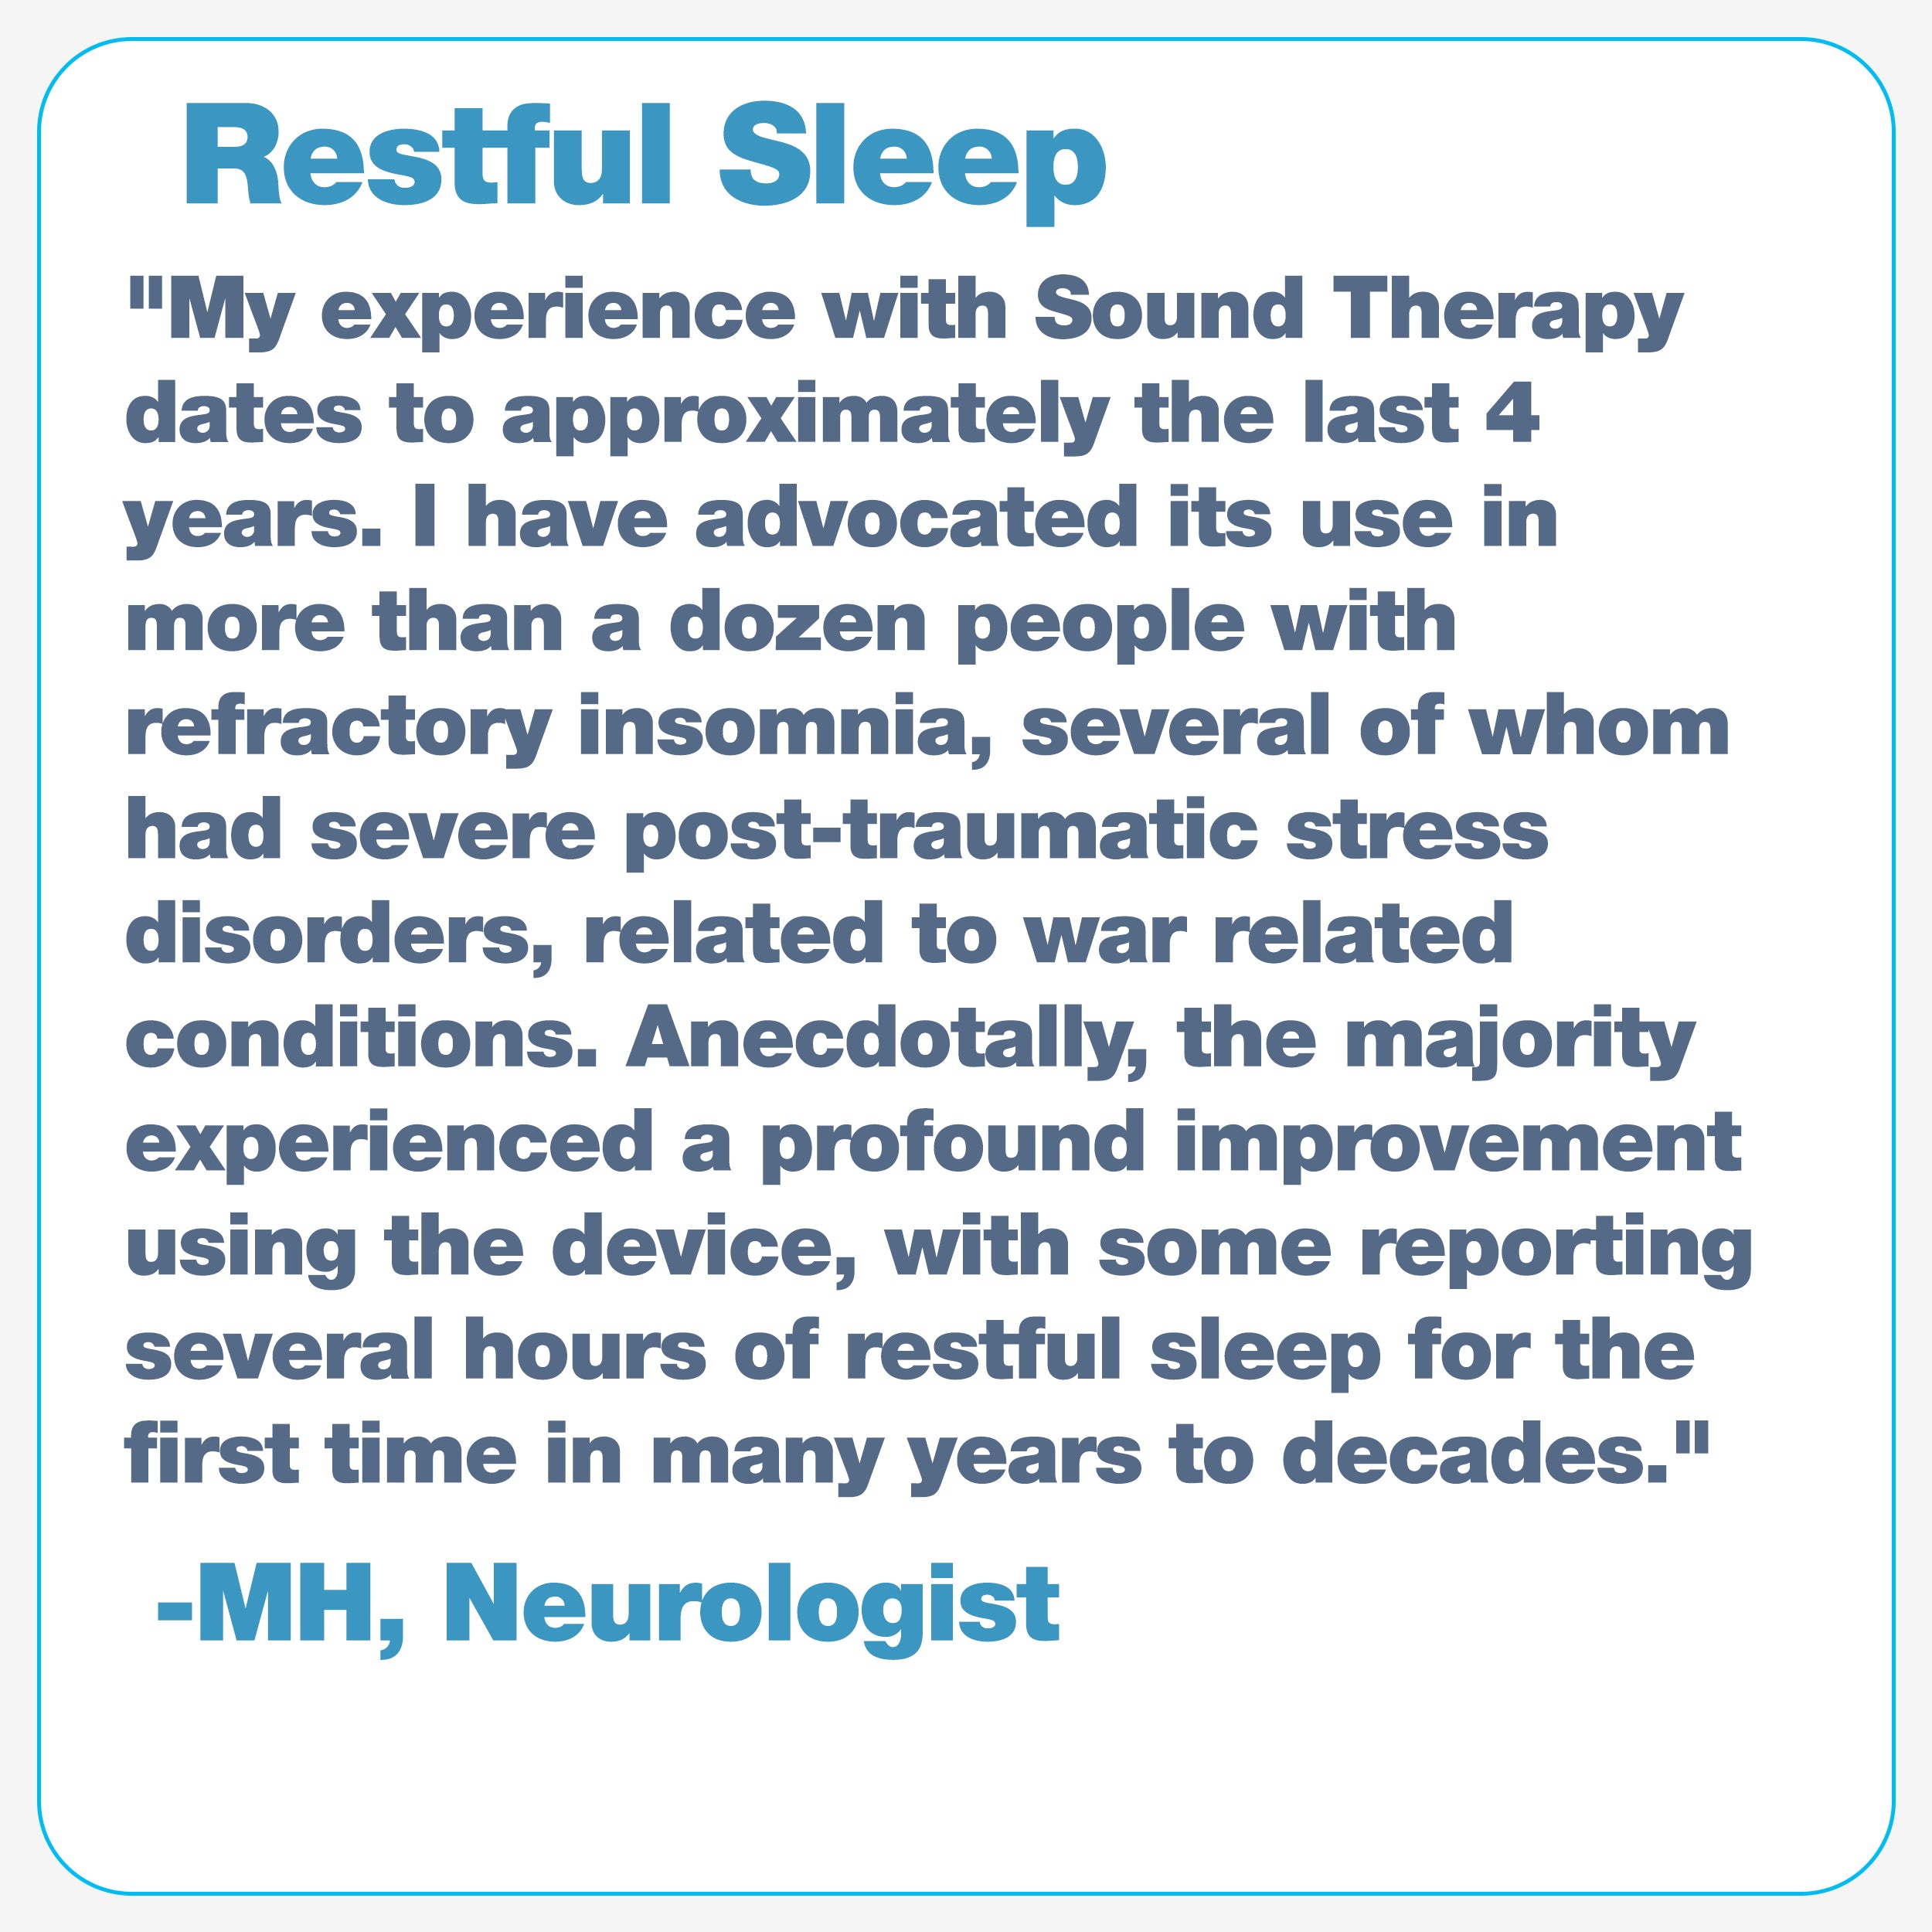 Neurologist Testimonial: Advocated use for restful sleep for over a dozen people with refractory insomnia, PTSD